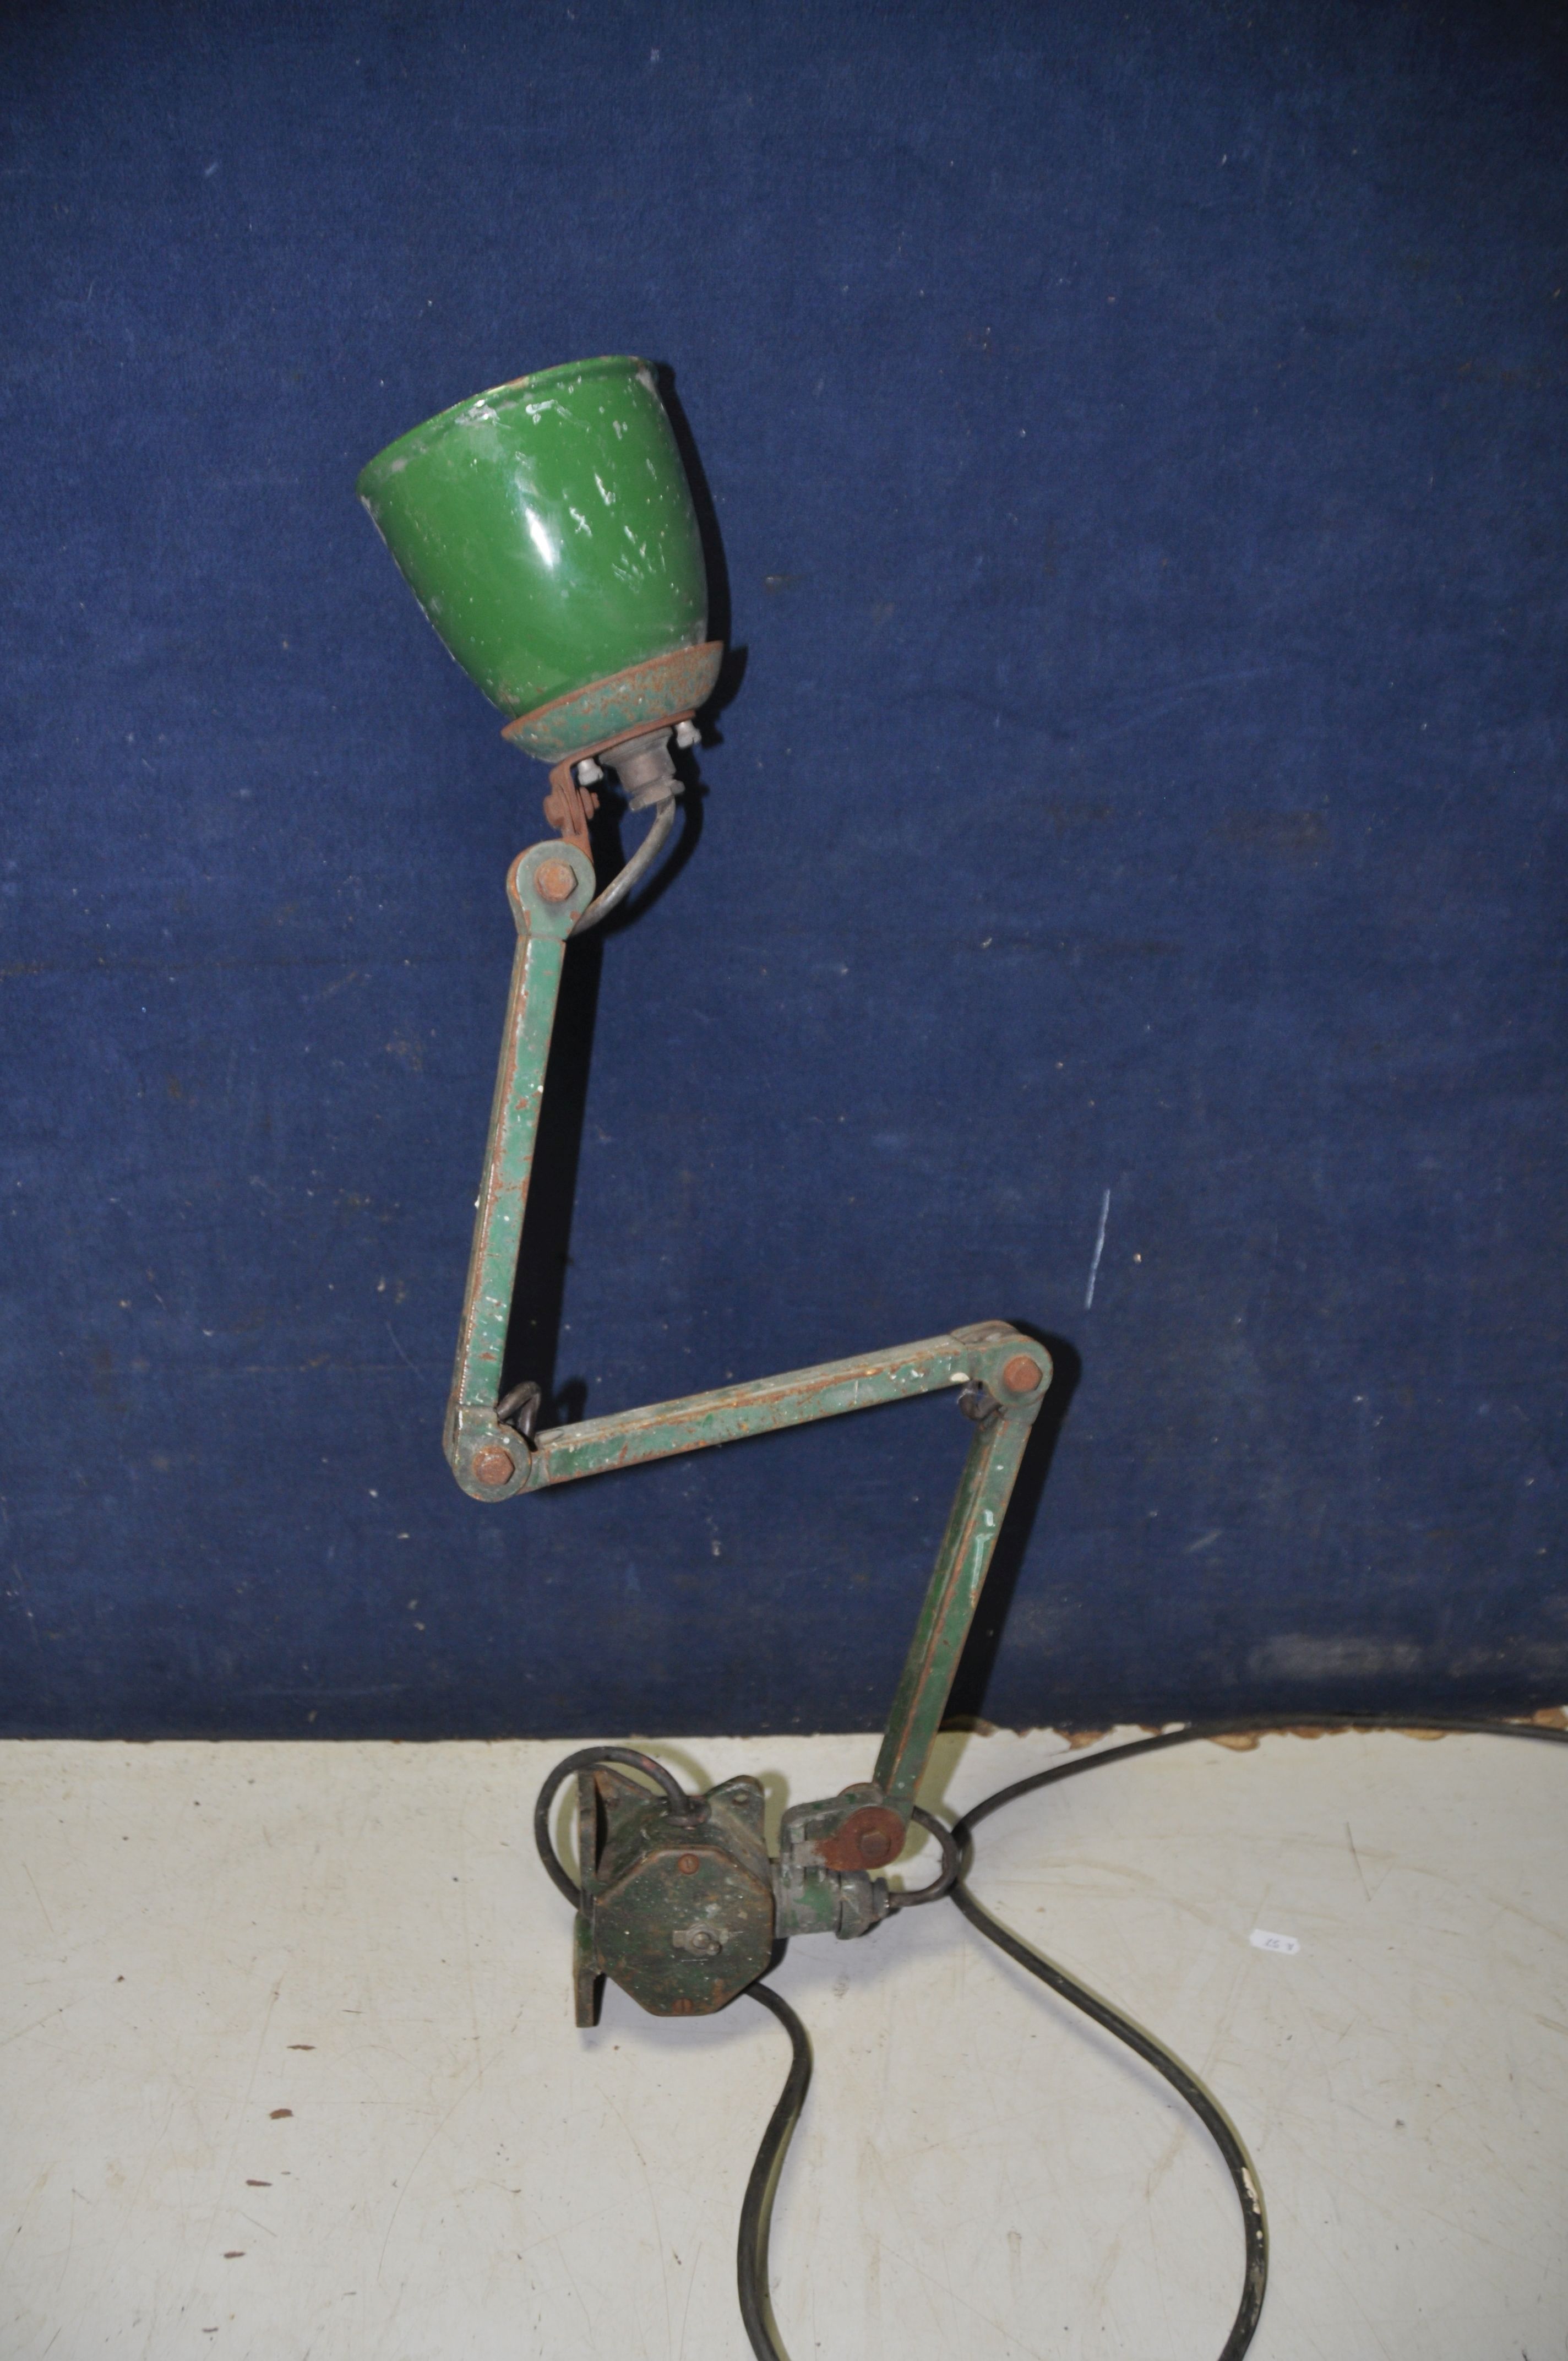 A ANGLE POISE STYLE LAMP (green in colour needs wiring - UNTESTED) - Image 2 of 2